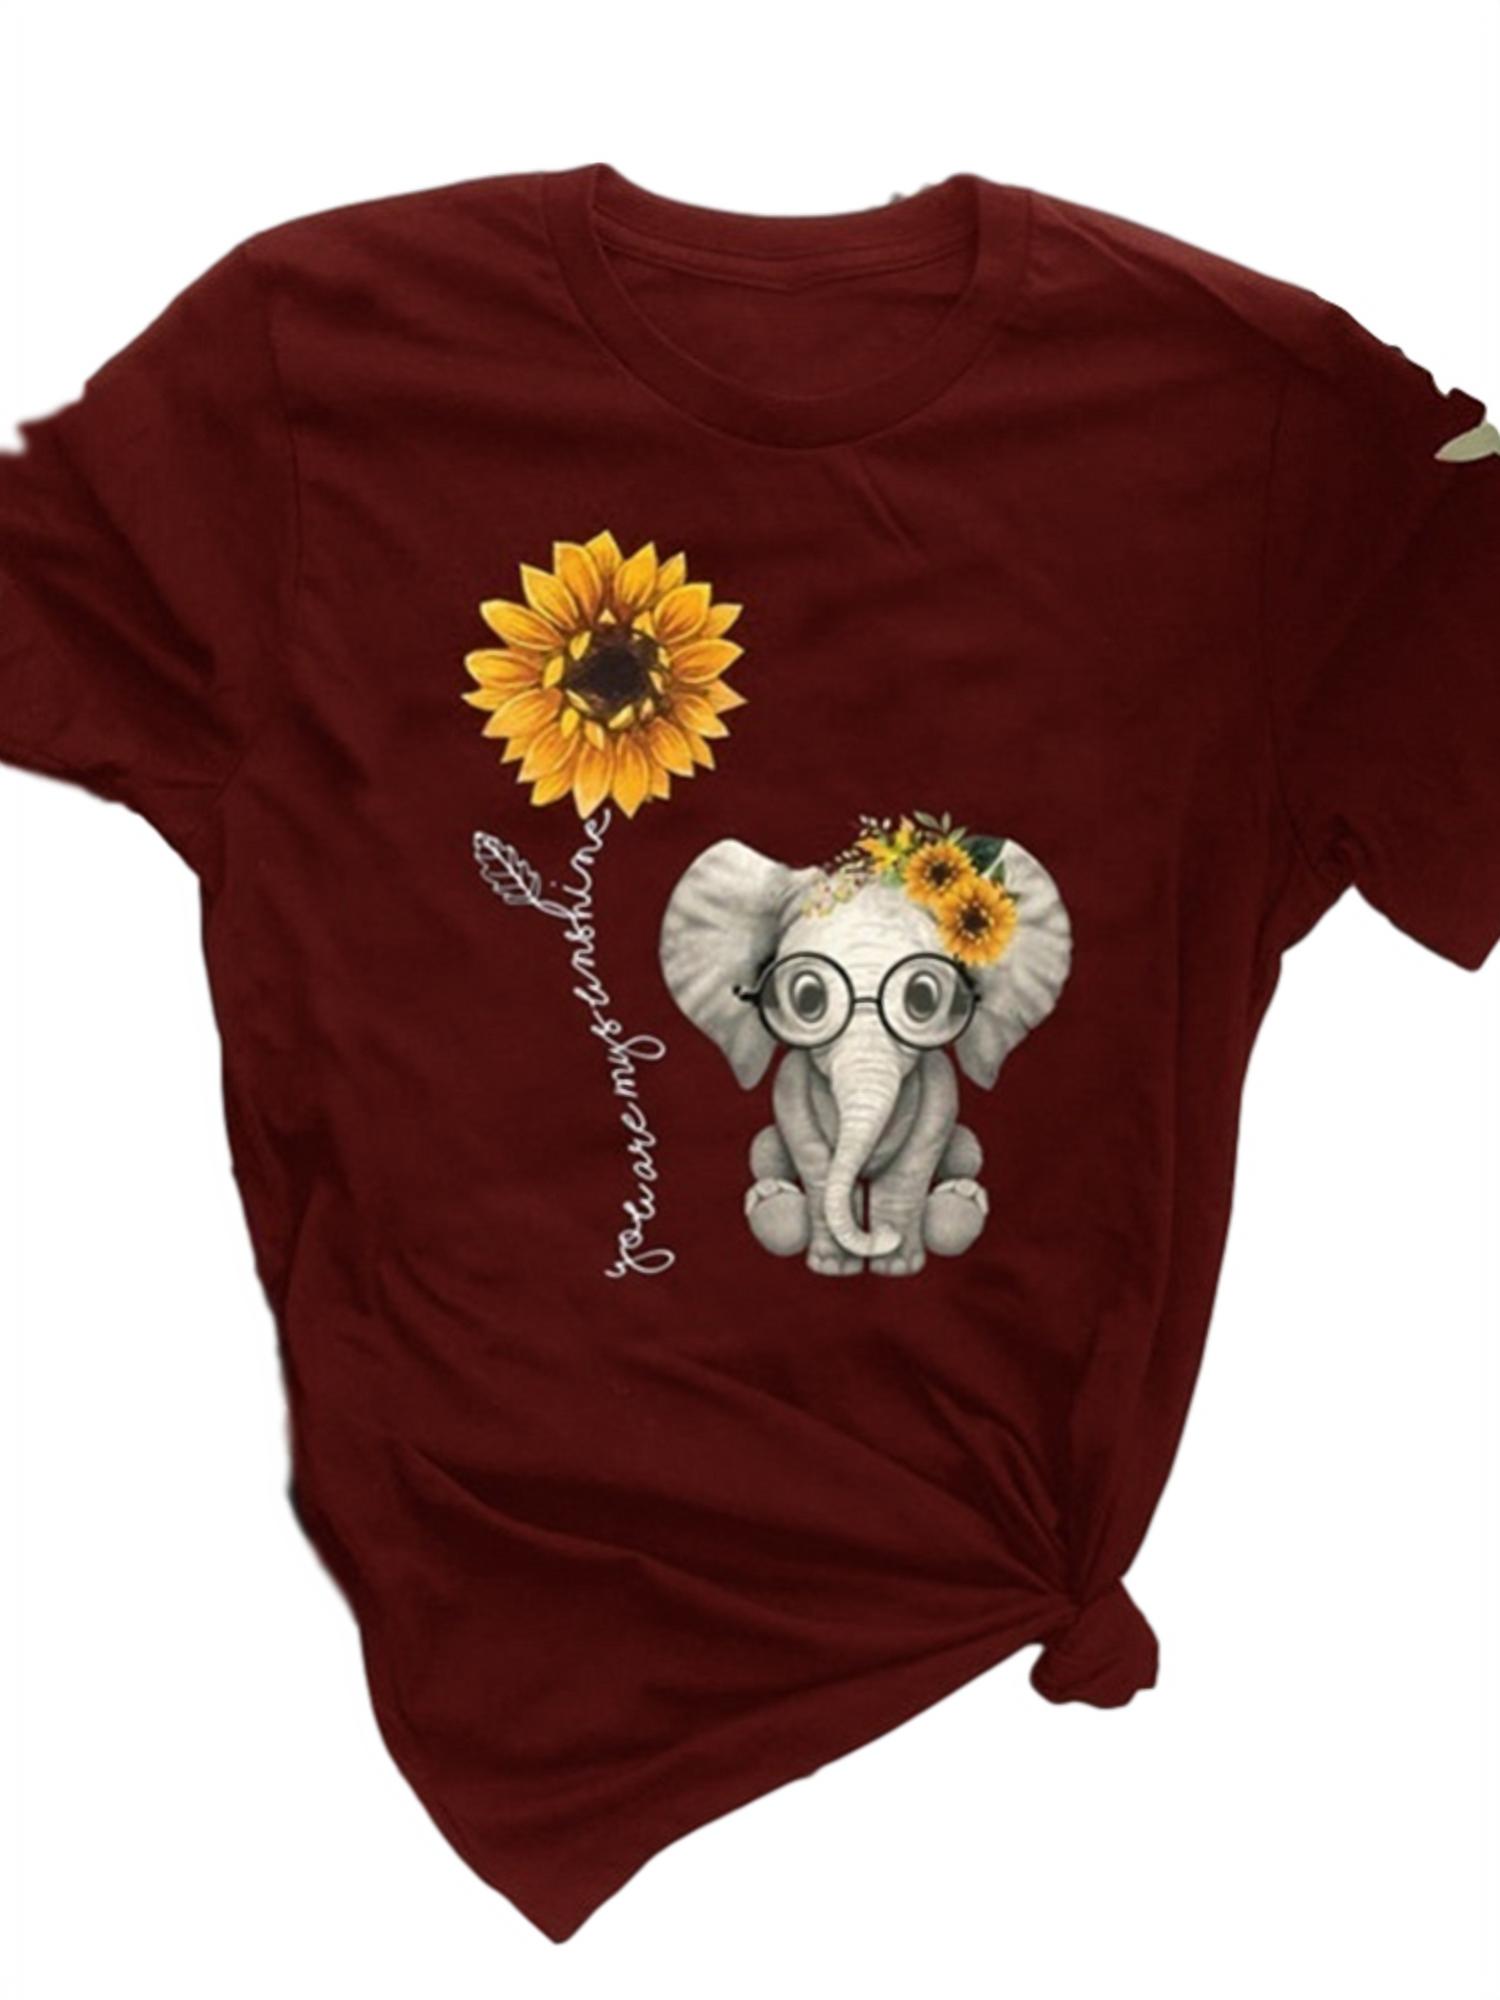 Women Short Sleeve Round Collar Blouse Cute Small Elephant Sunflower Graphic Printed Casual T-Shirts Women Tops Plus Size S-5Xl - image 1 of 1